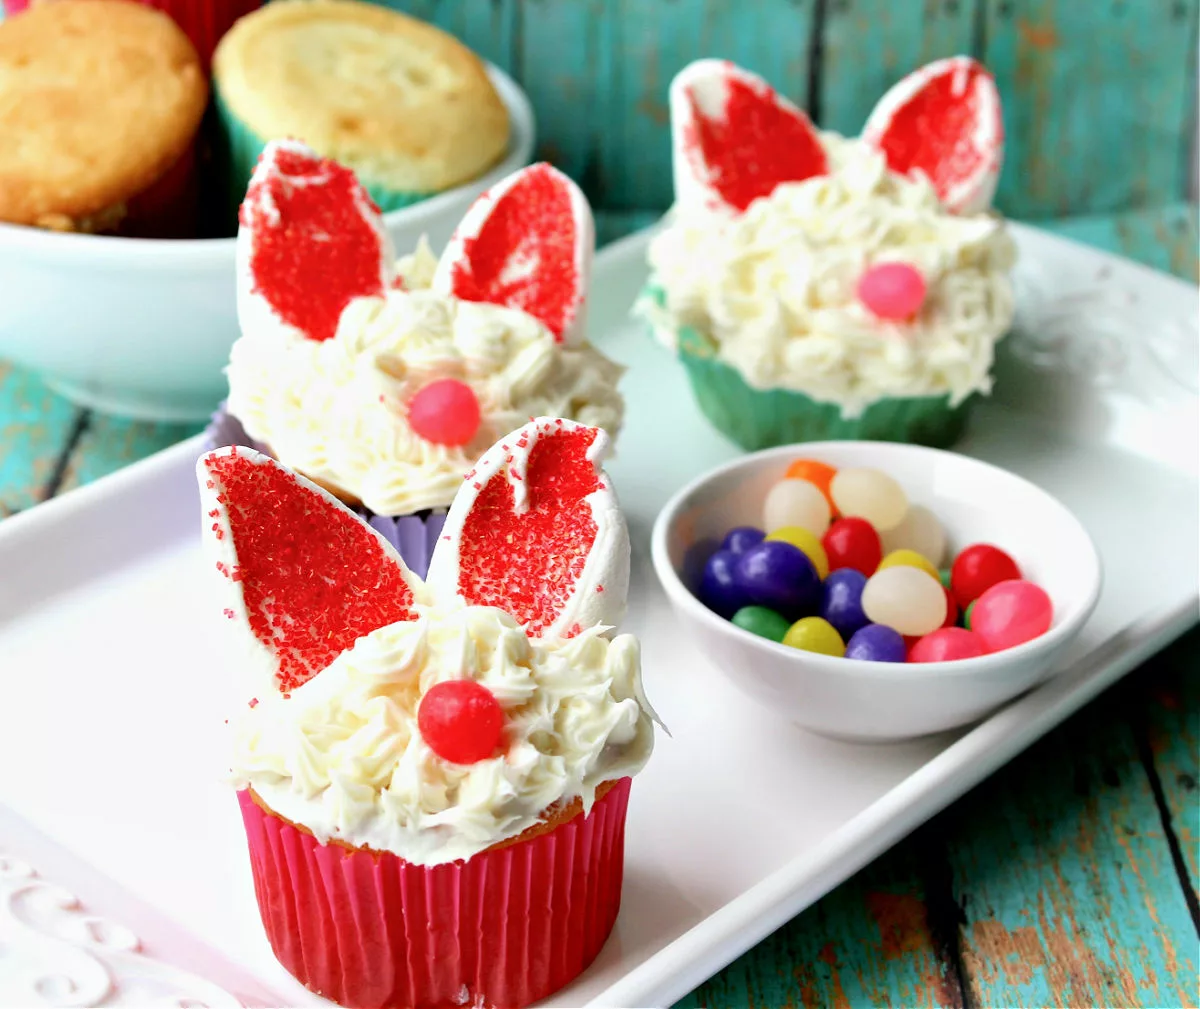 Looking for More Easter Dessert Recipes Like this Easter Bunny Cupcakes Recipe?

Easter Bunny Cupcakes